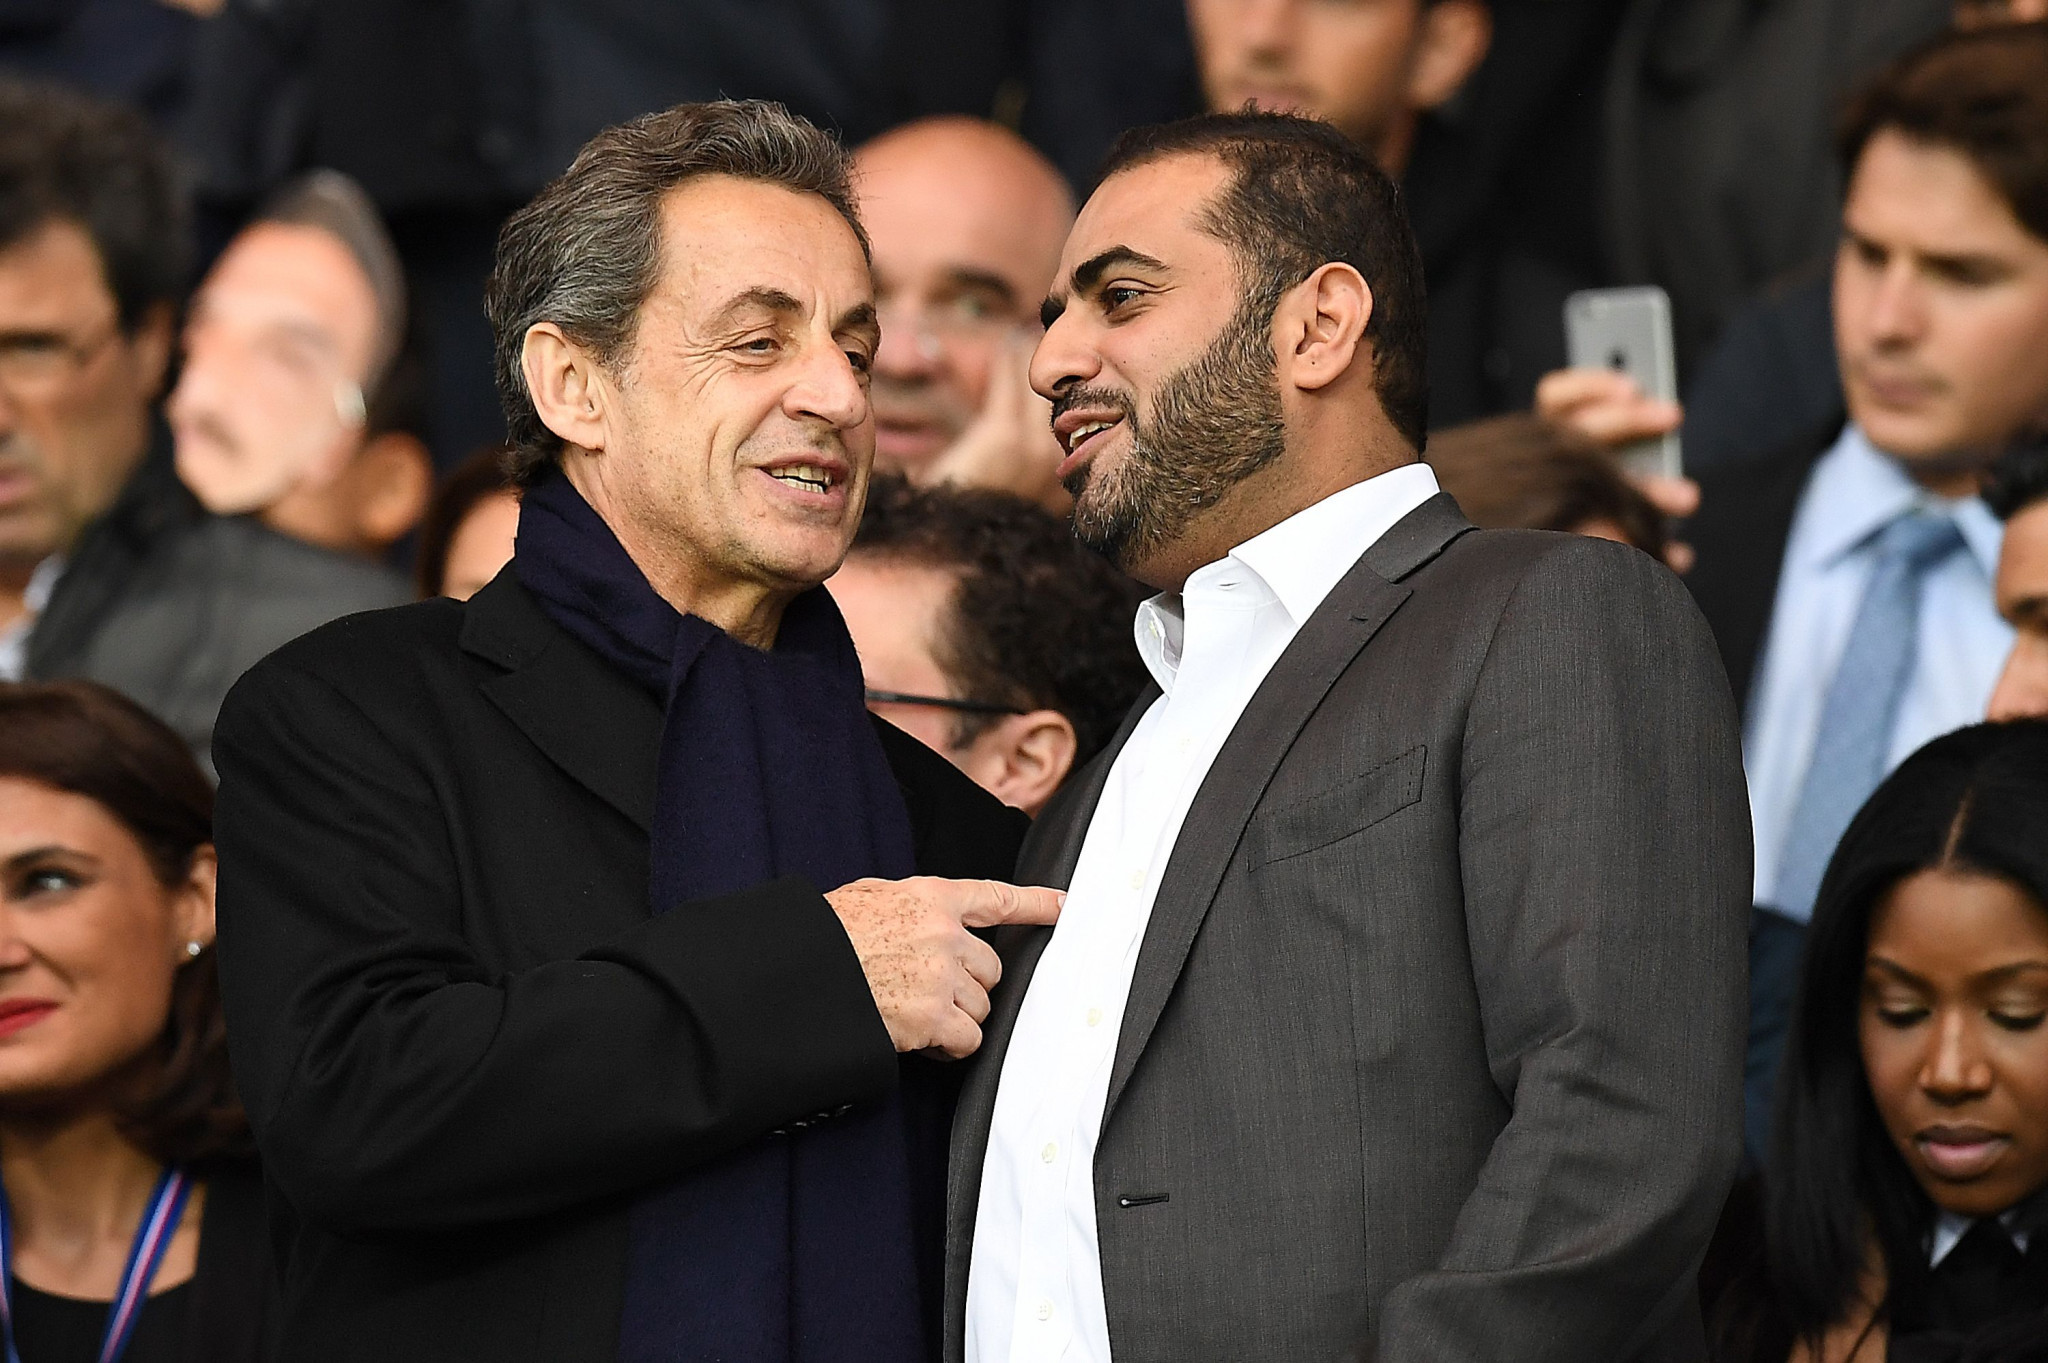 beIN Sports chief executive Yousef Al-Obaidly, pictured with former French President Nicolas Sarkozy, is facing allegations of active corruption over Doha's bid for the IAAF World Championships ©Getty Images